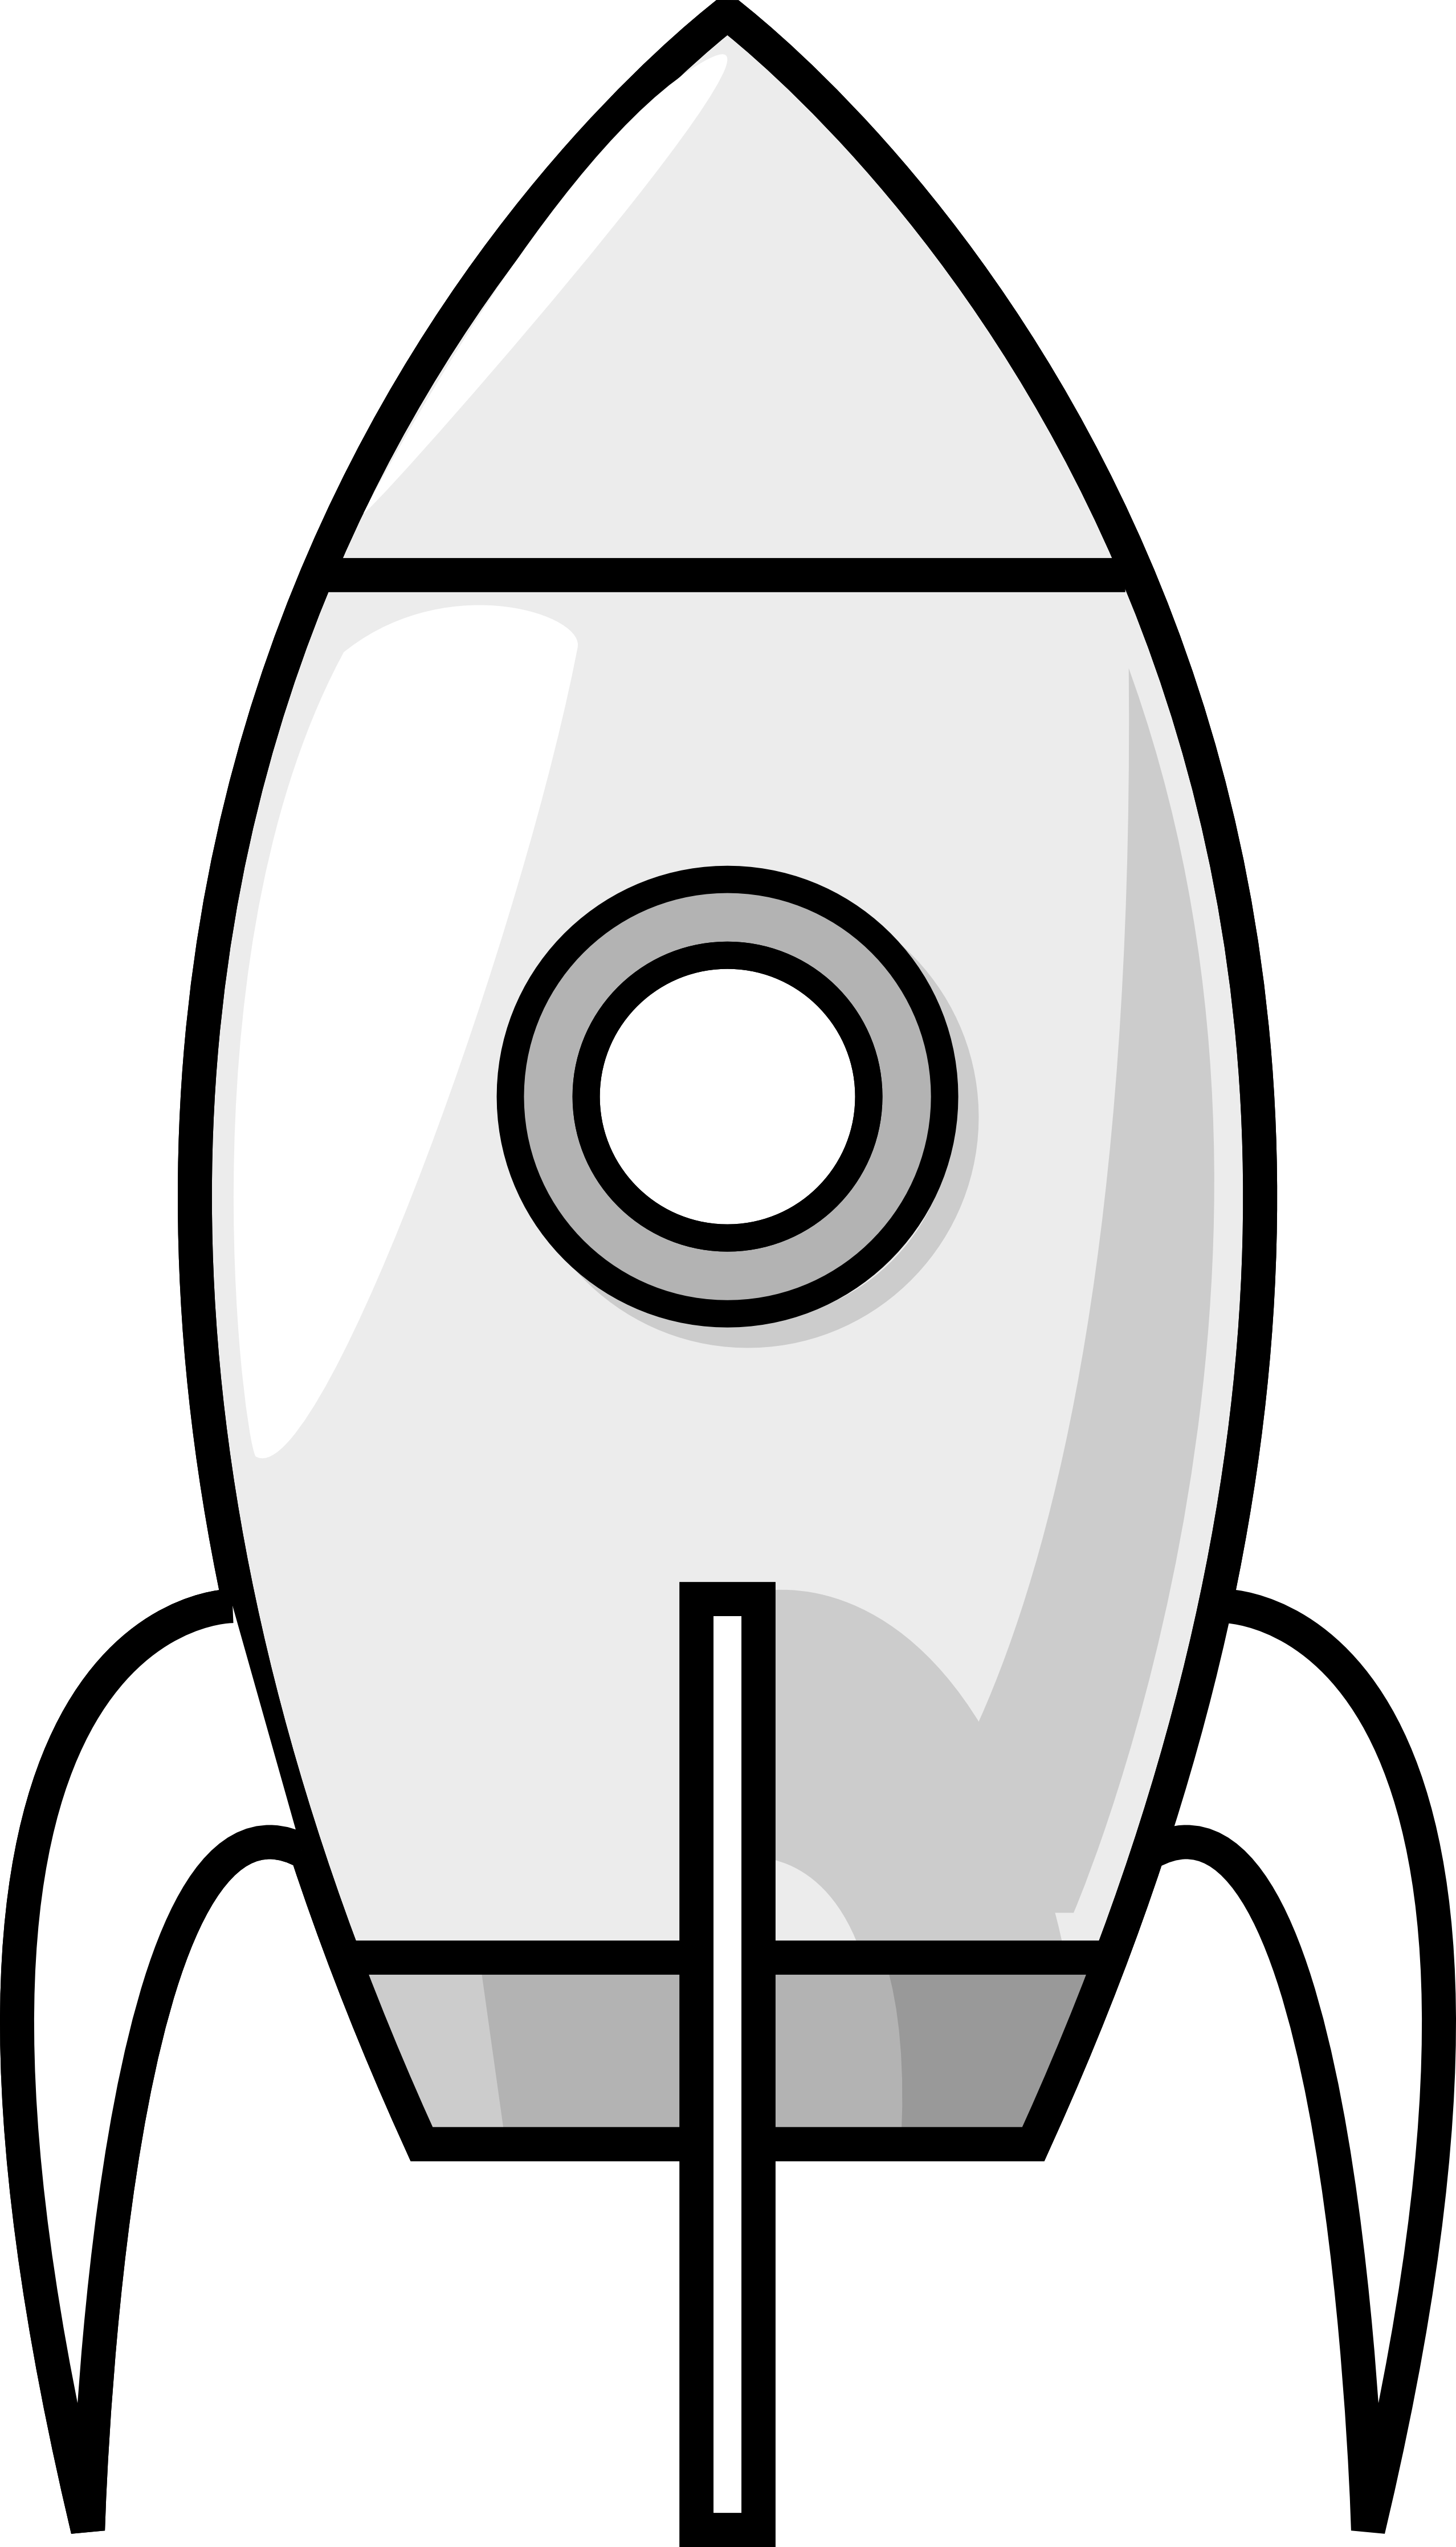 Rocket Clipart Black And White Clipart Panda Free Clipart.